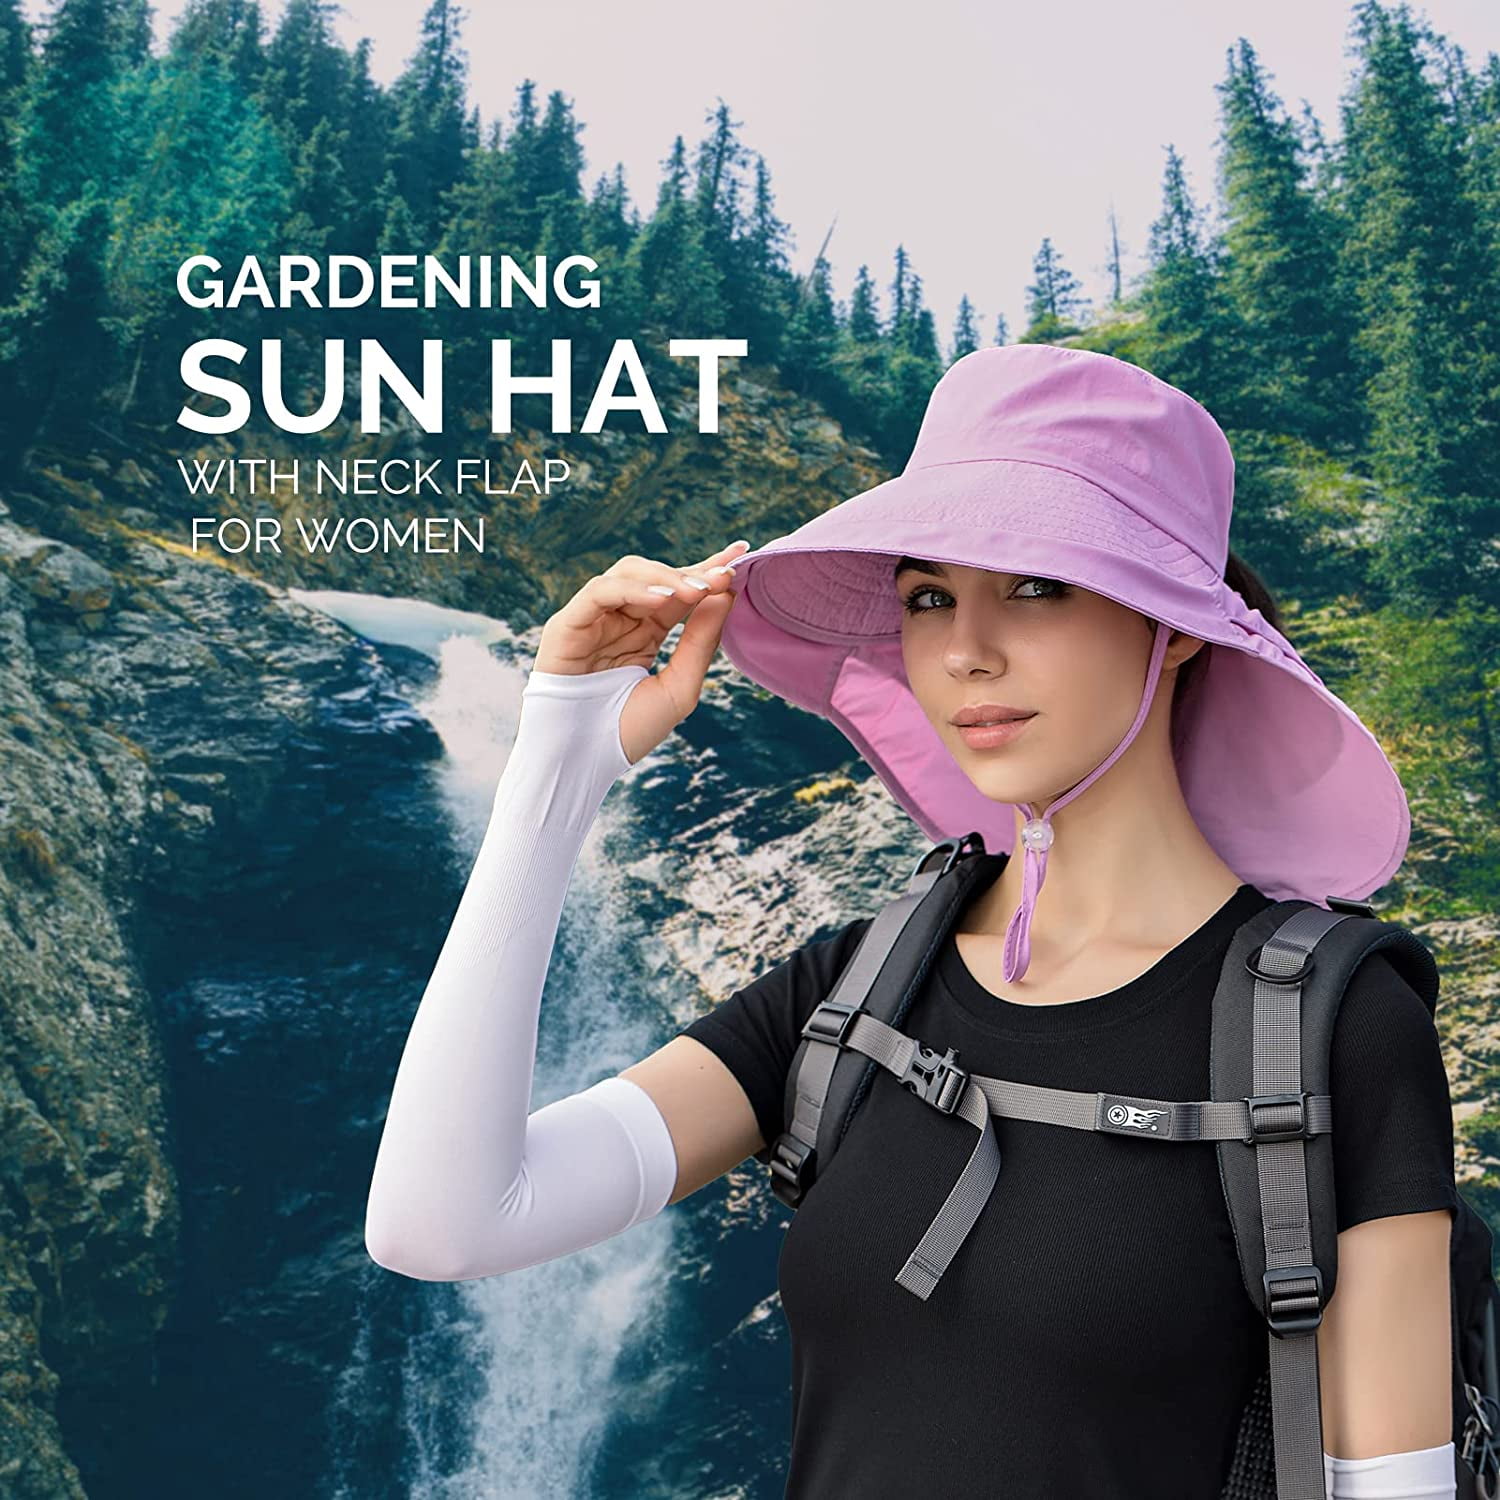 Sun Hats for Women Hiking Fishing Hat Wide Brim Hat with Large Neck Flap  Sun Protection Hats for Men and Women 